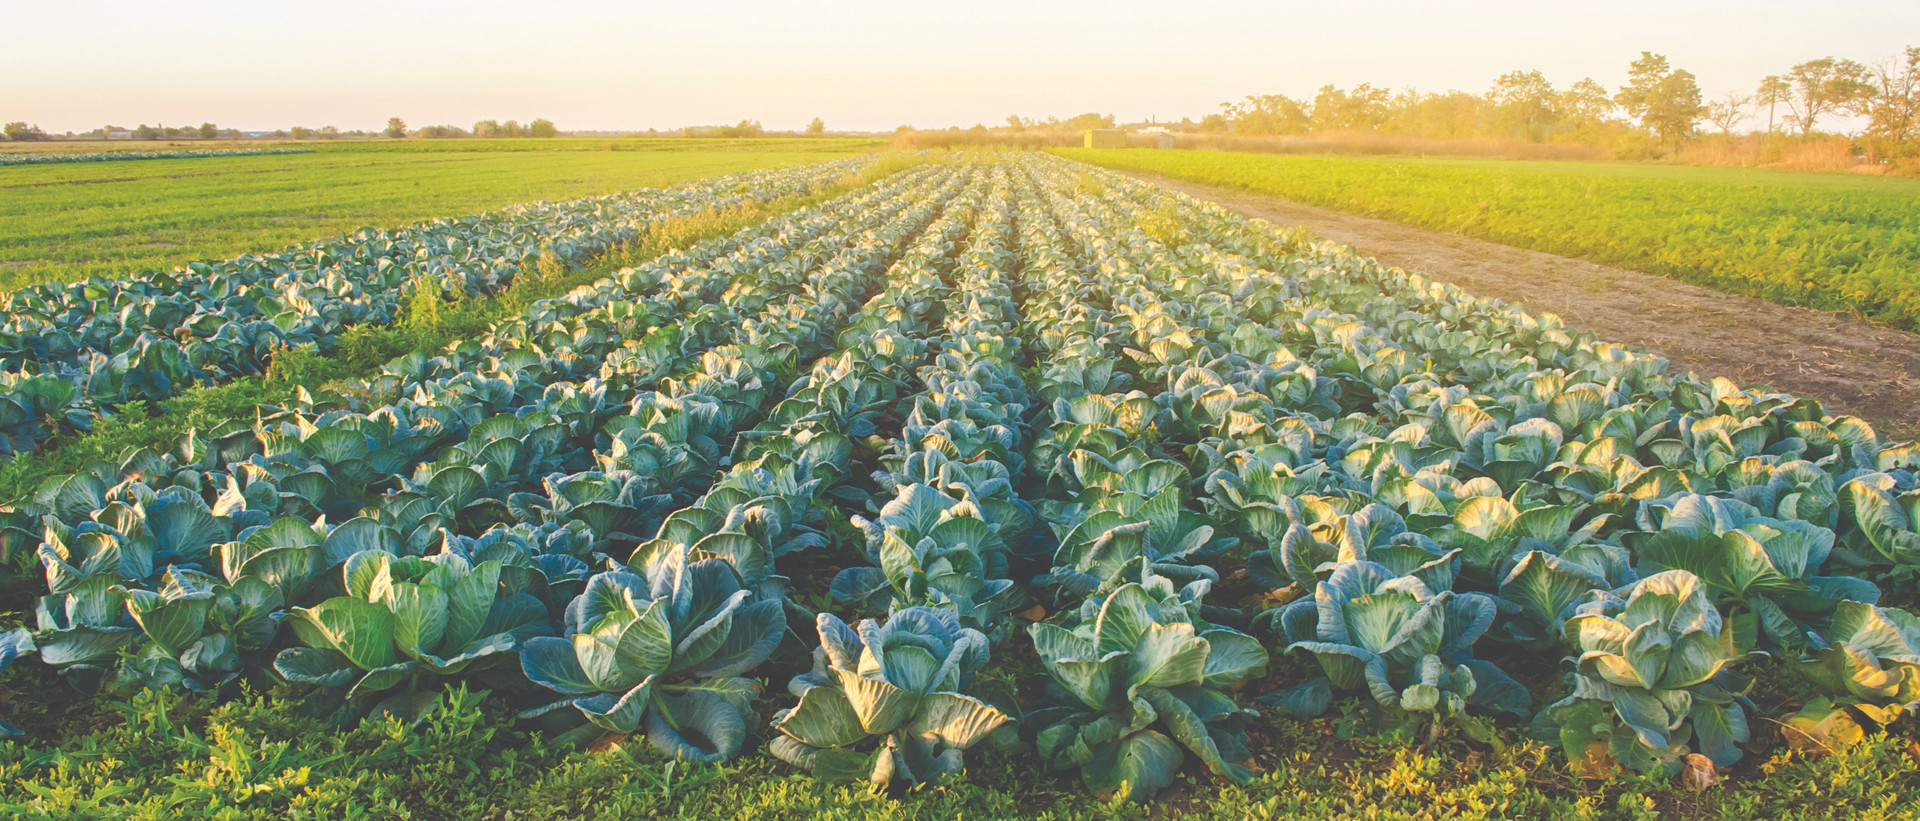 cabbage-plantations-sunset-light-growing-organic-vegetables-eco-friendly-products-compressed.jpg